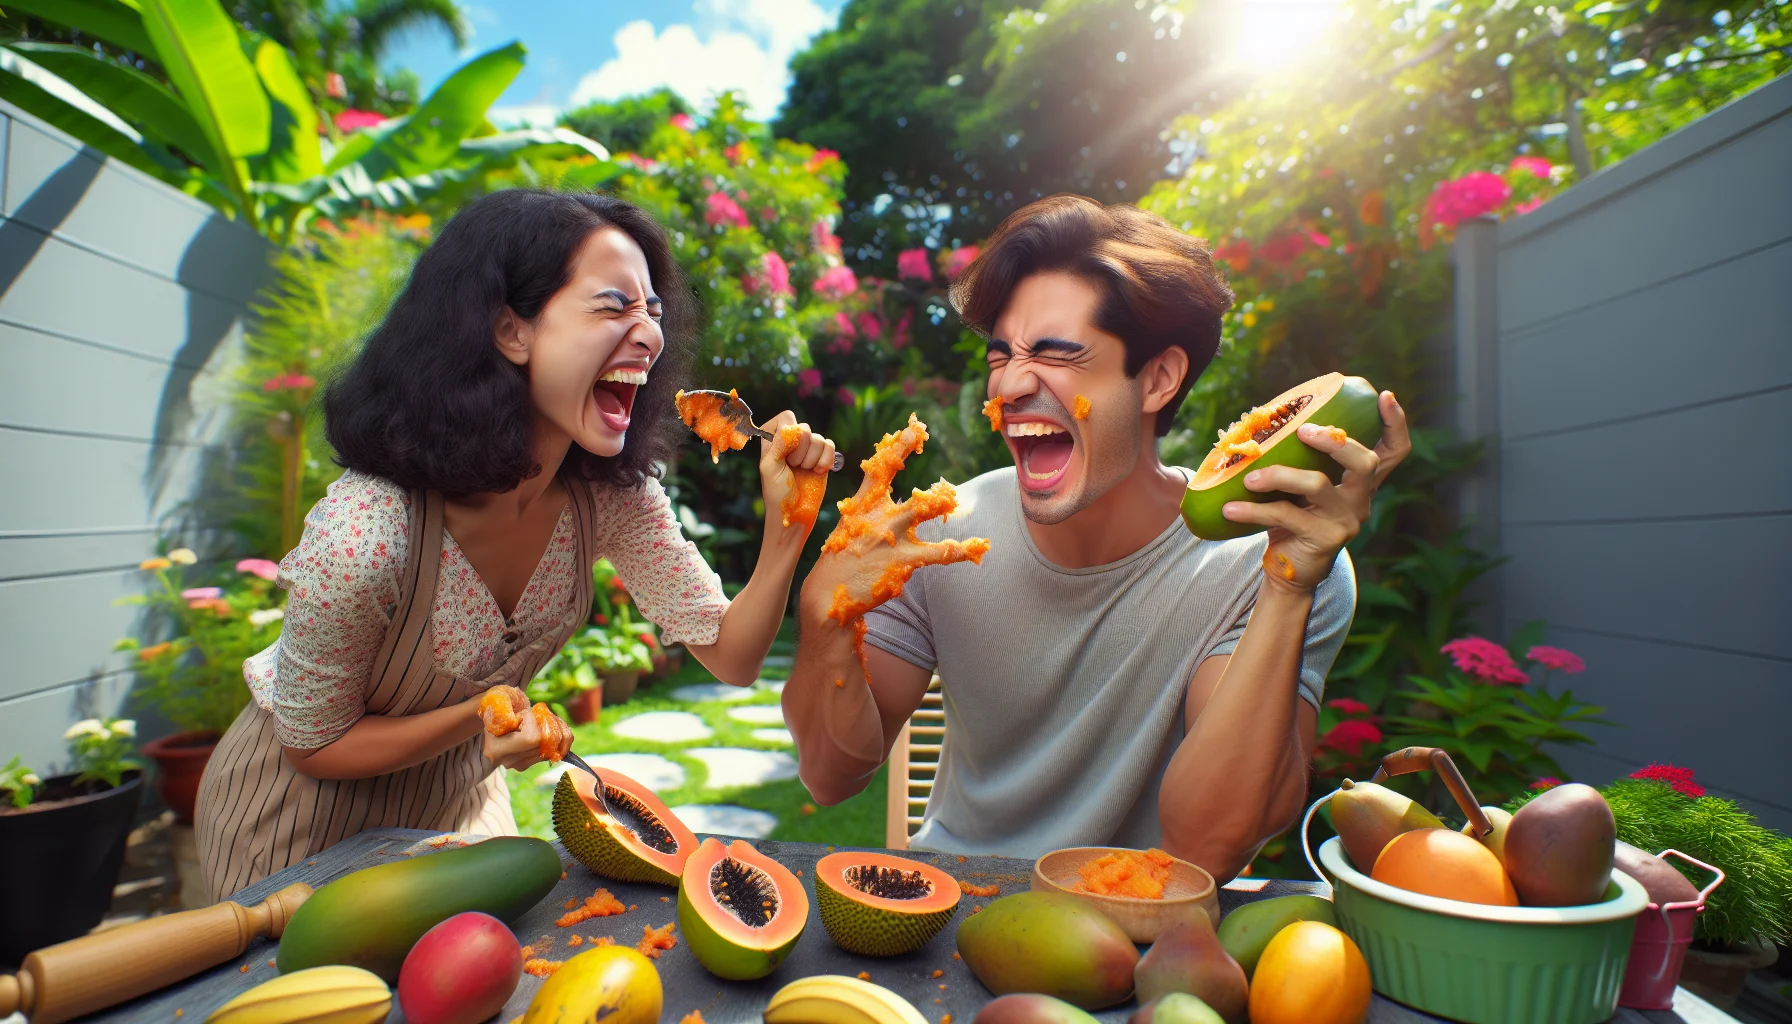 Generate a realistic scene where a South Asian man and a Hispanic woman engage themselves in an amusing paw paw eating scenario in a vibrant garden. They're surrounded by flourishing greenery in sunshine, with garden tools playfully scattered around. The woman is holding a ripe paw paw cut open, demonstrating how to scoop out the sweet pulp with a spoon. The man hilariously tries to imitate her, but ends up smearing some pulp on his face. Their laughter and the surrounding abundance of fruits and flowers paint an enticing image of garden joys.